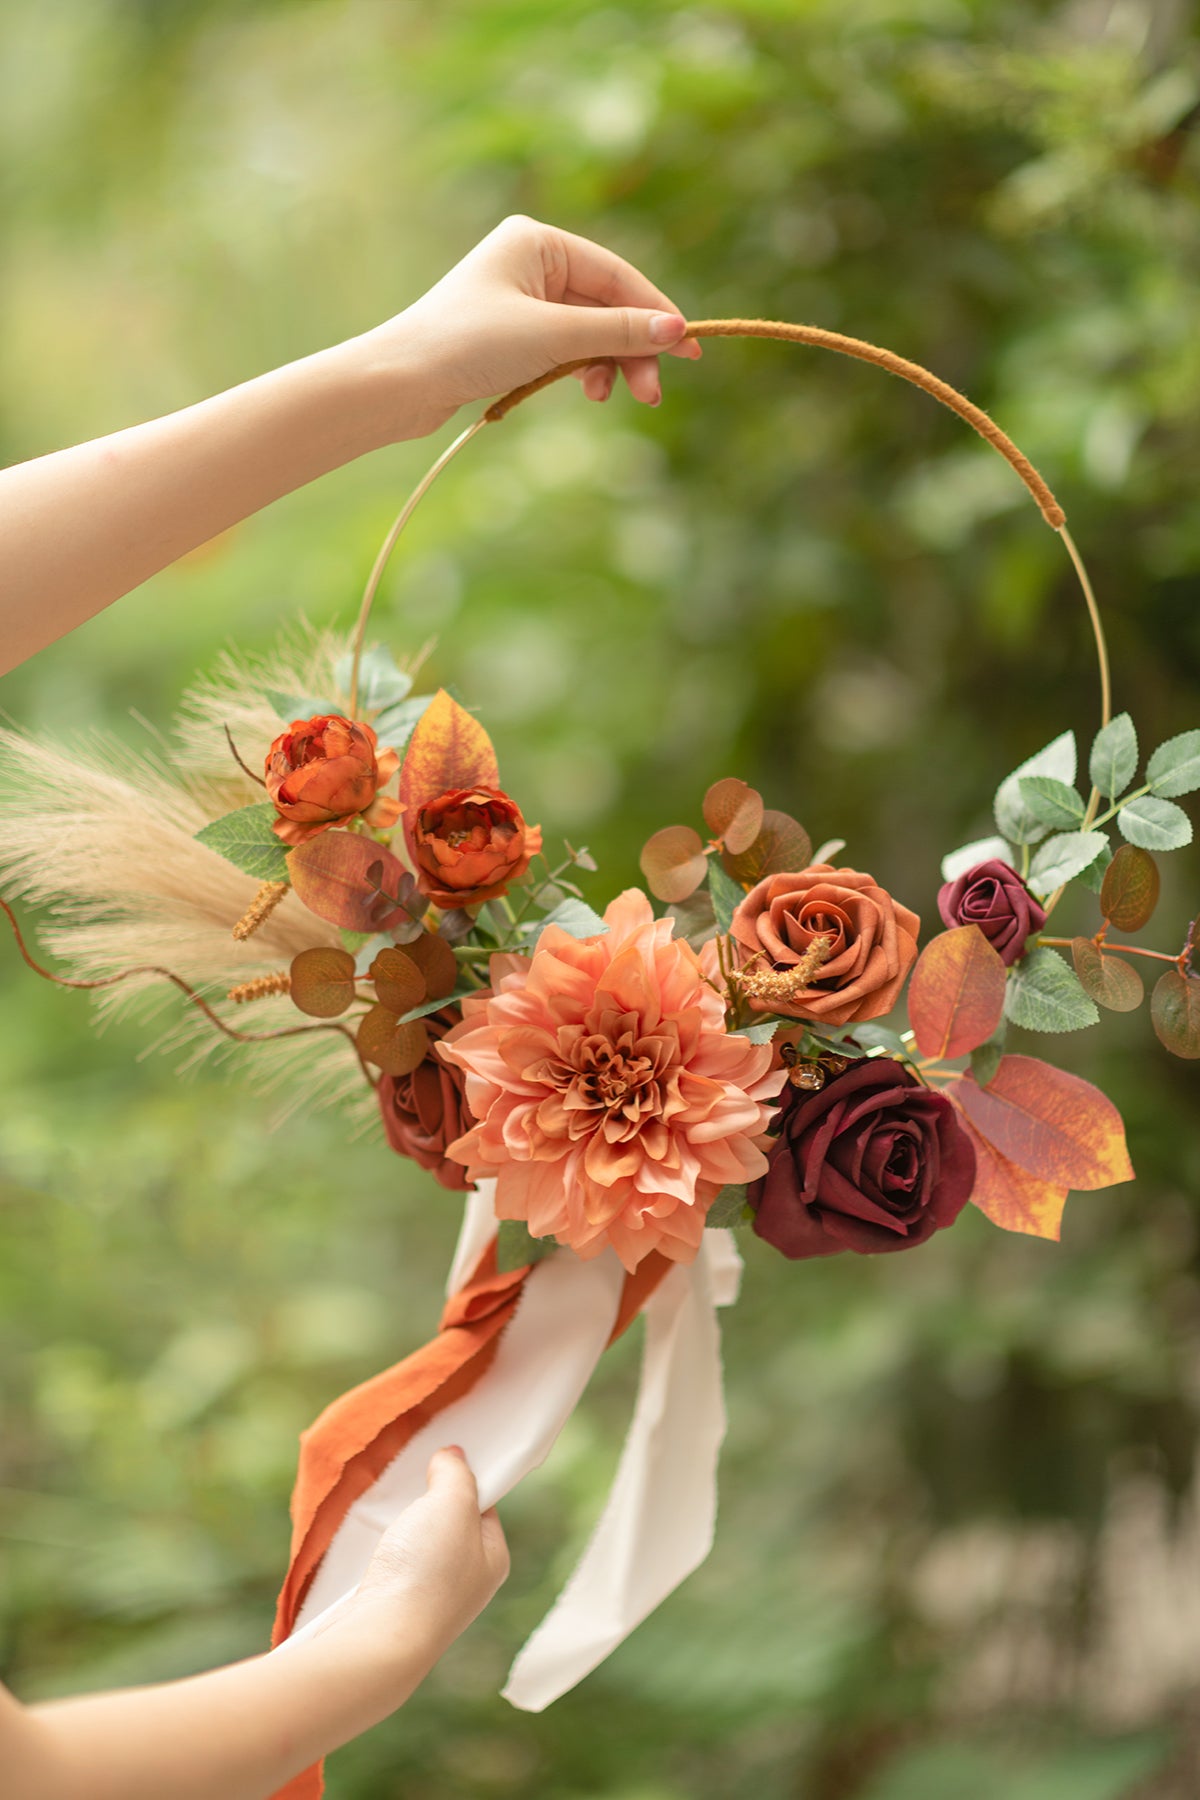 Hoop Bridesmaid Bouquets in Sunset Terracotta